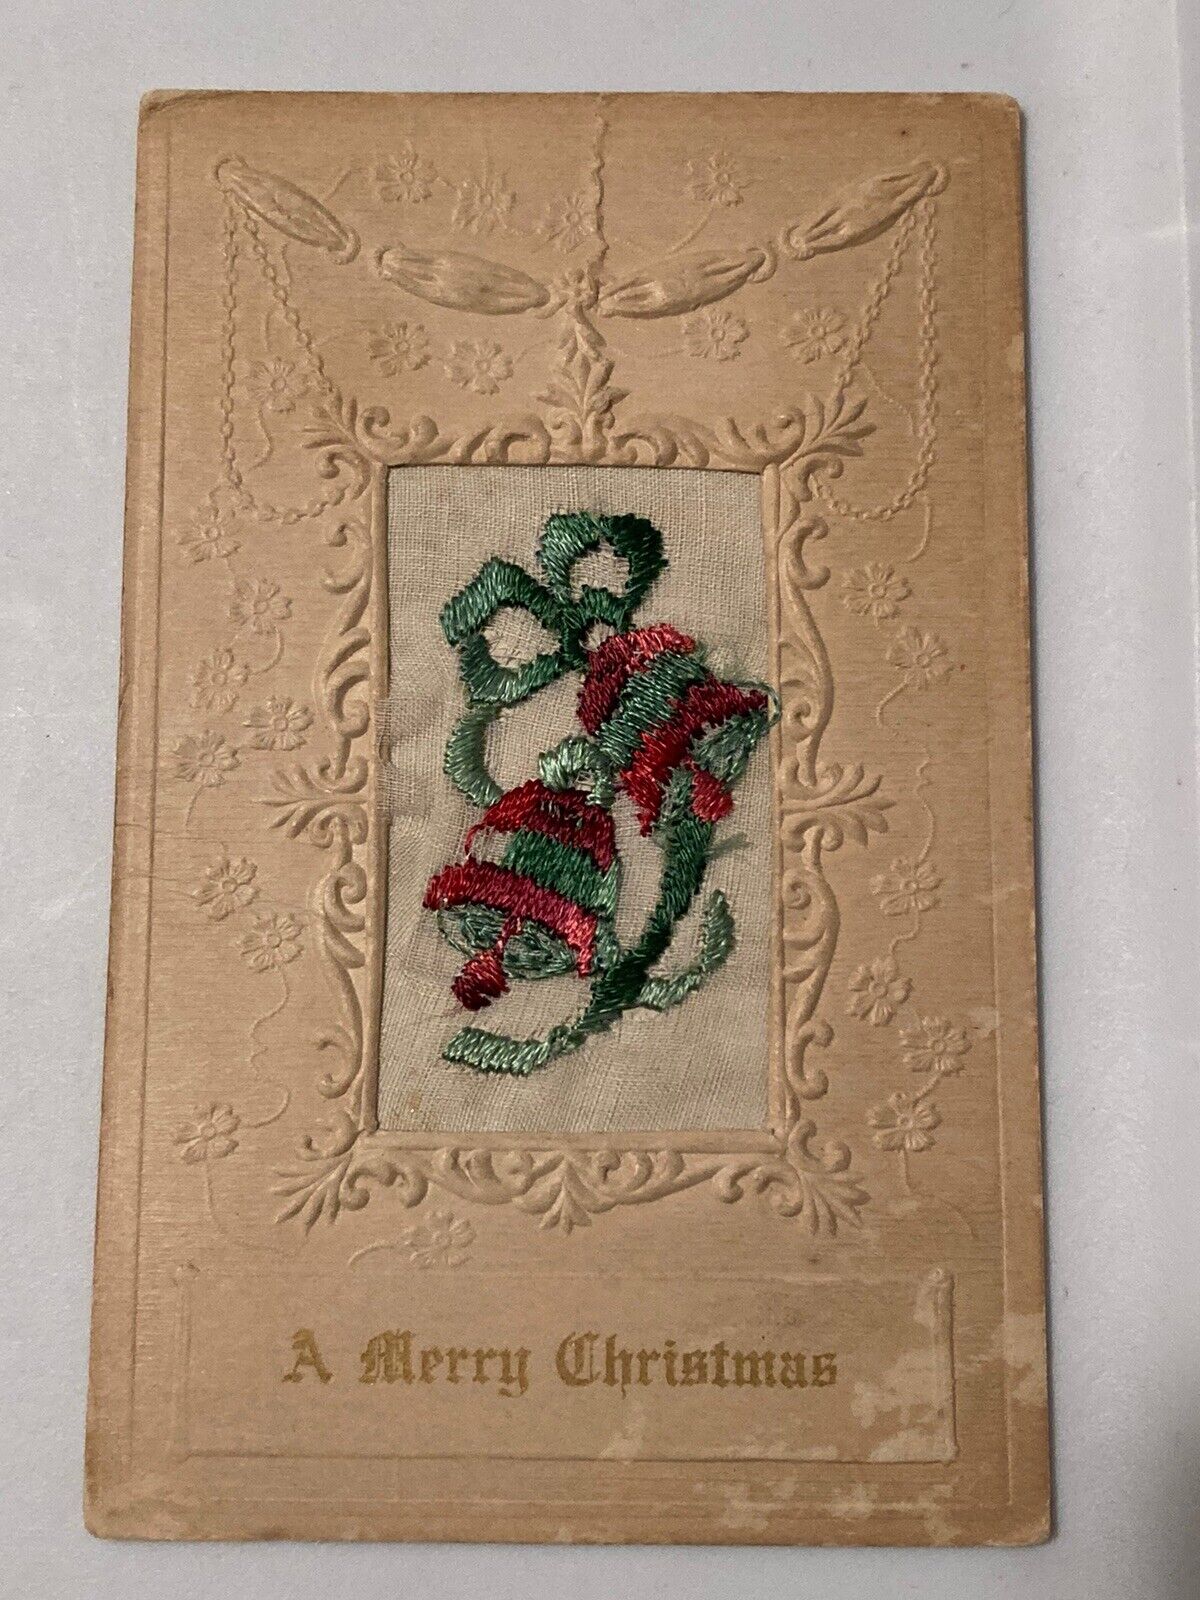 1916 Merry Christmas Postcard Embroidered Holiday Bells Embossed Floral Pattern